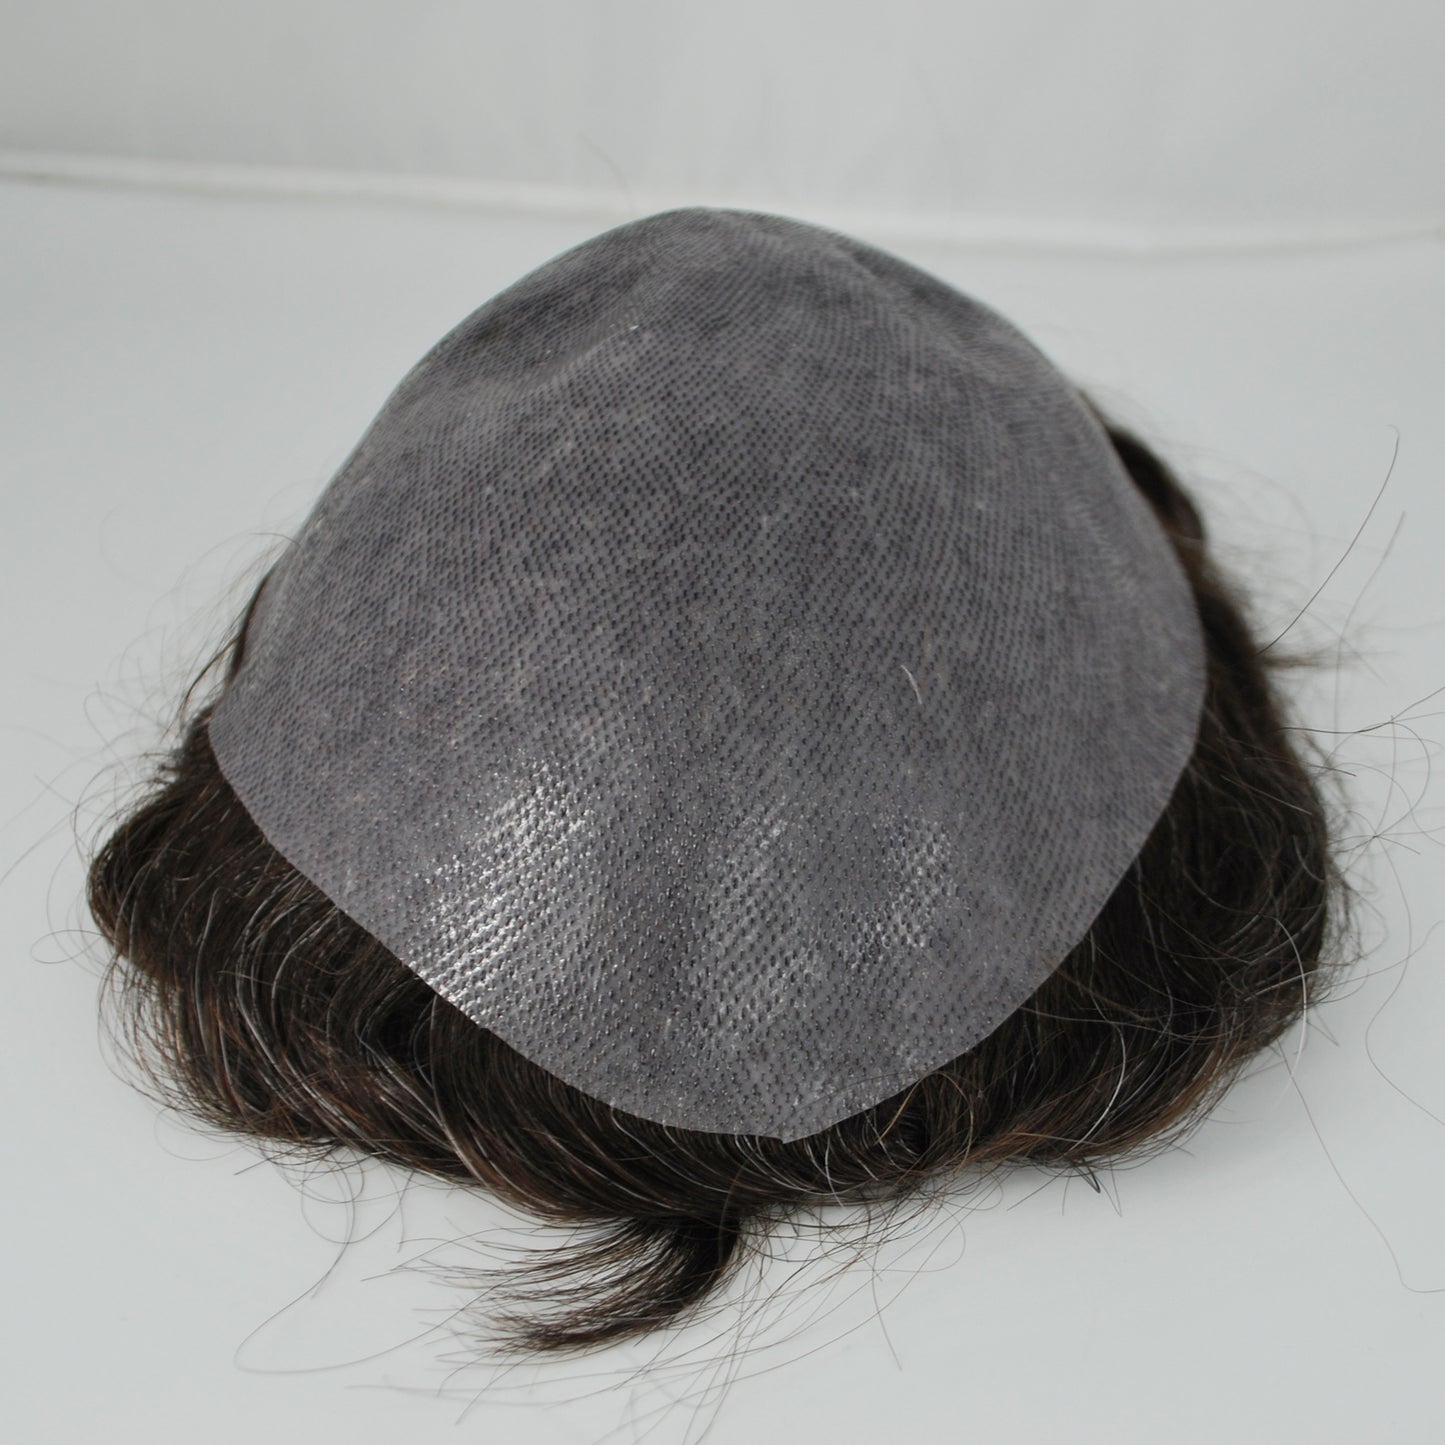 Clearance toupee #2 dark brown mixed 15% grey hair system for men thin PU knotted